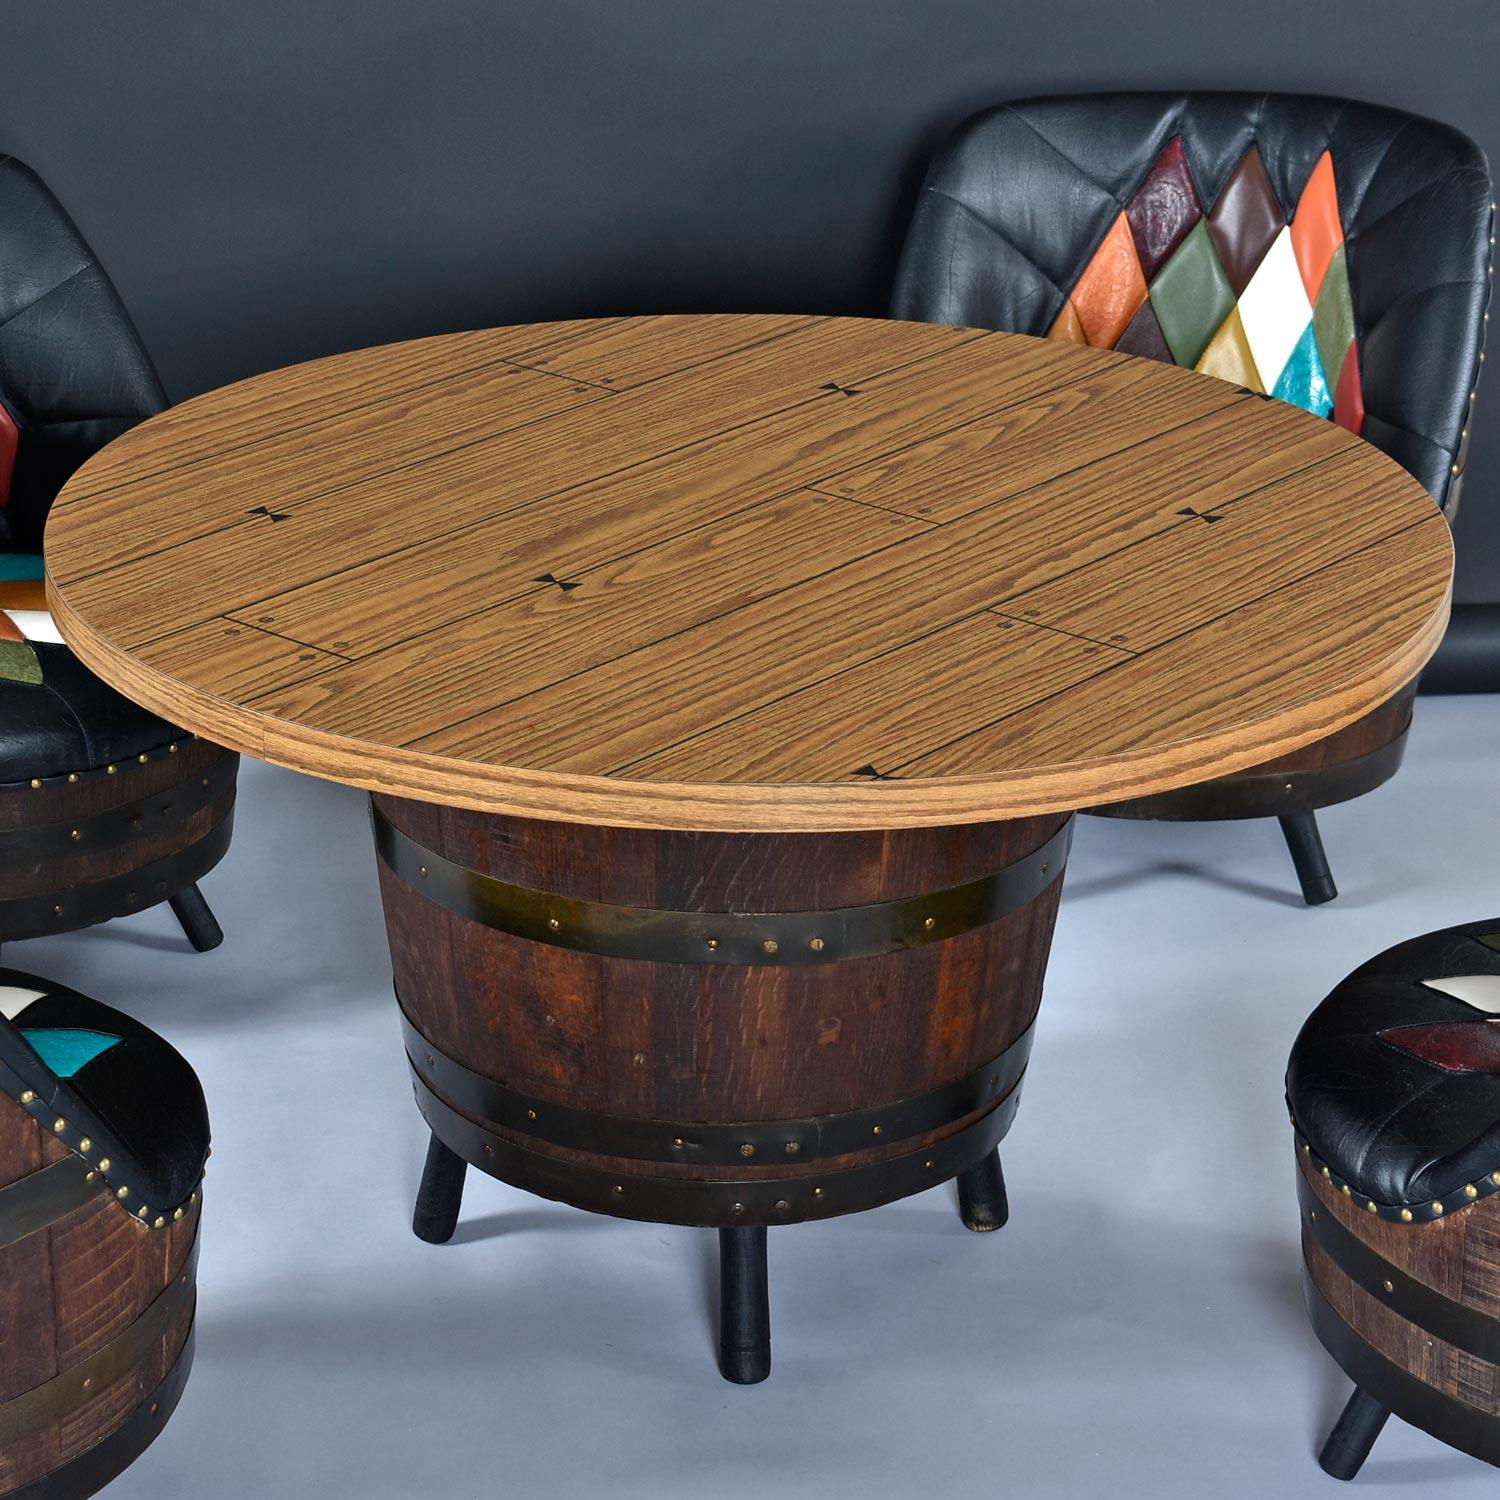 barrel table and chairs